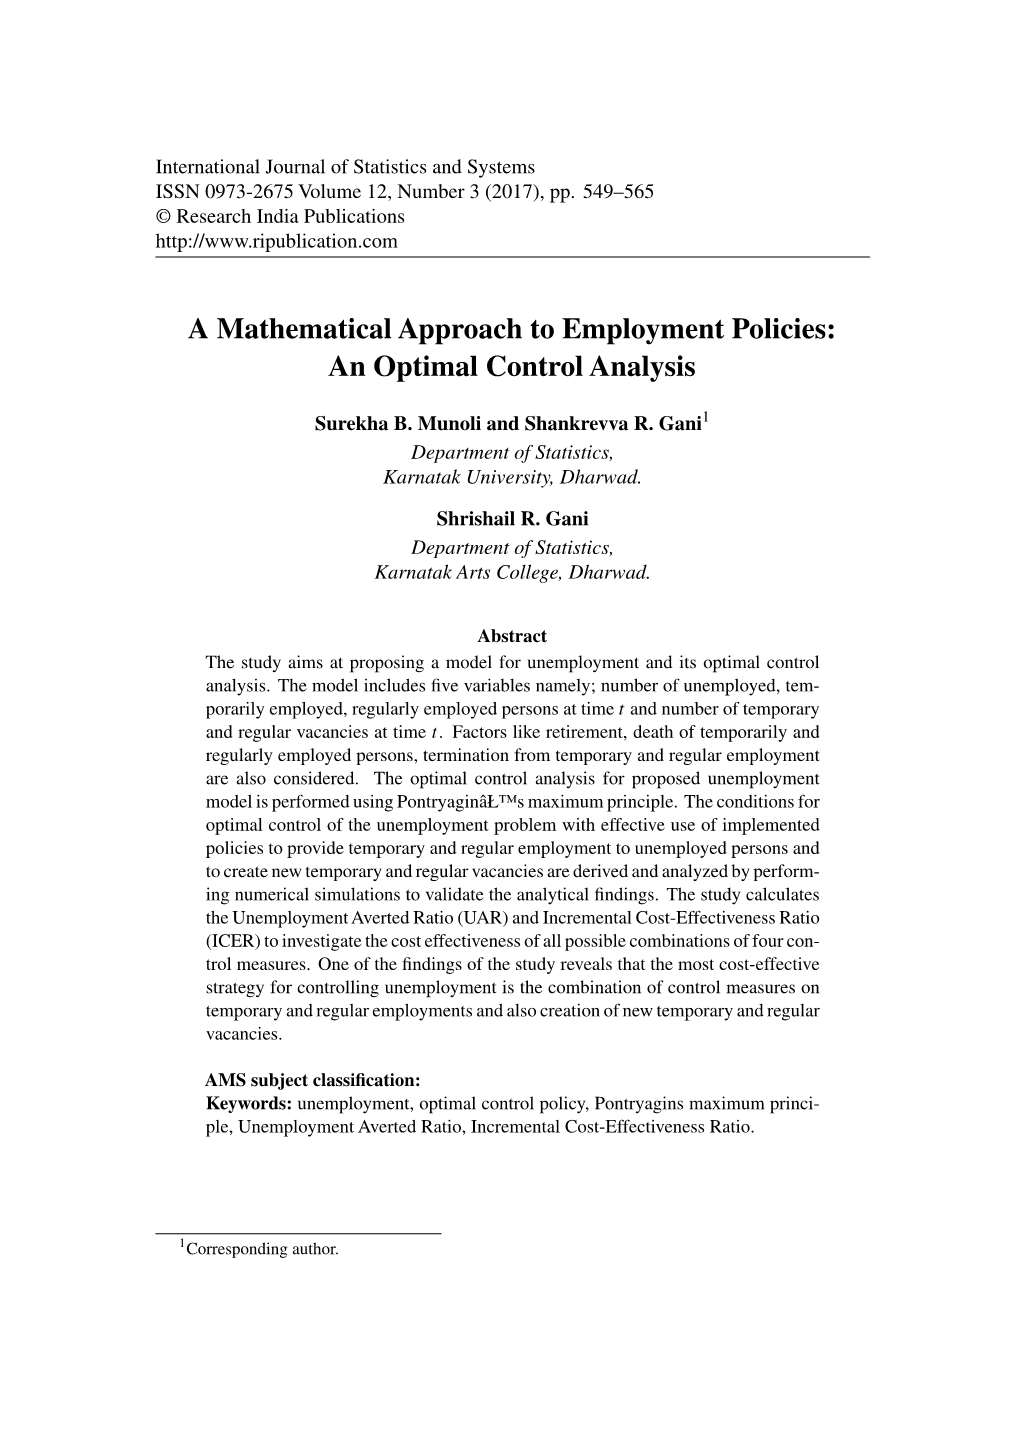 A Mathematical Approach to Employment Policies: an Optimal Control Analysis